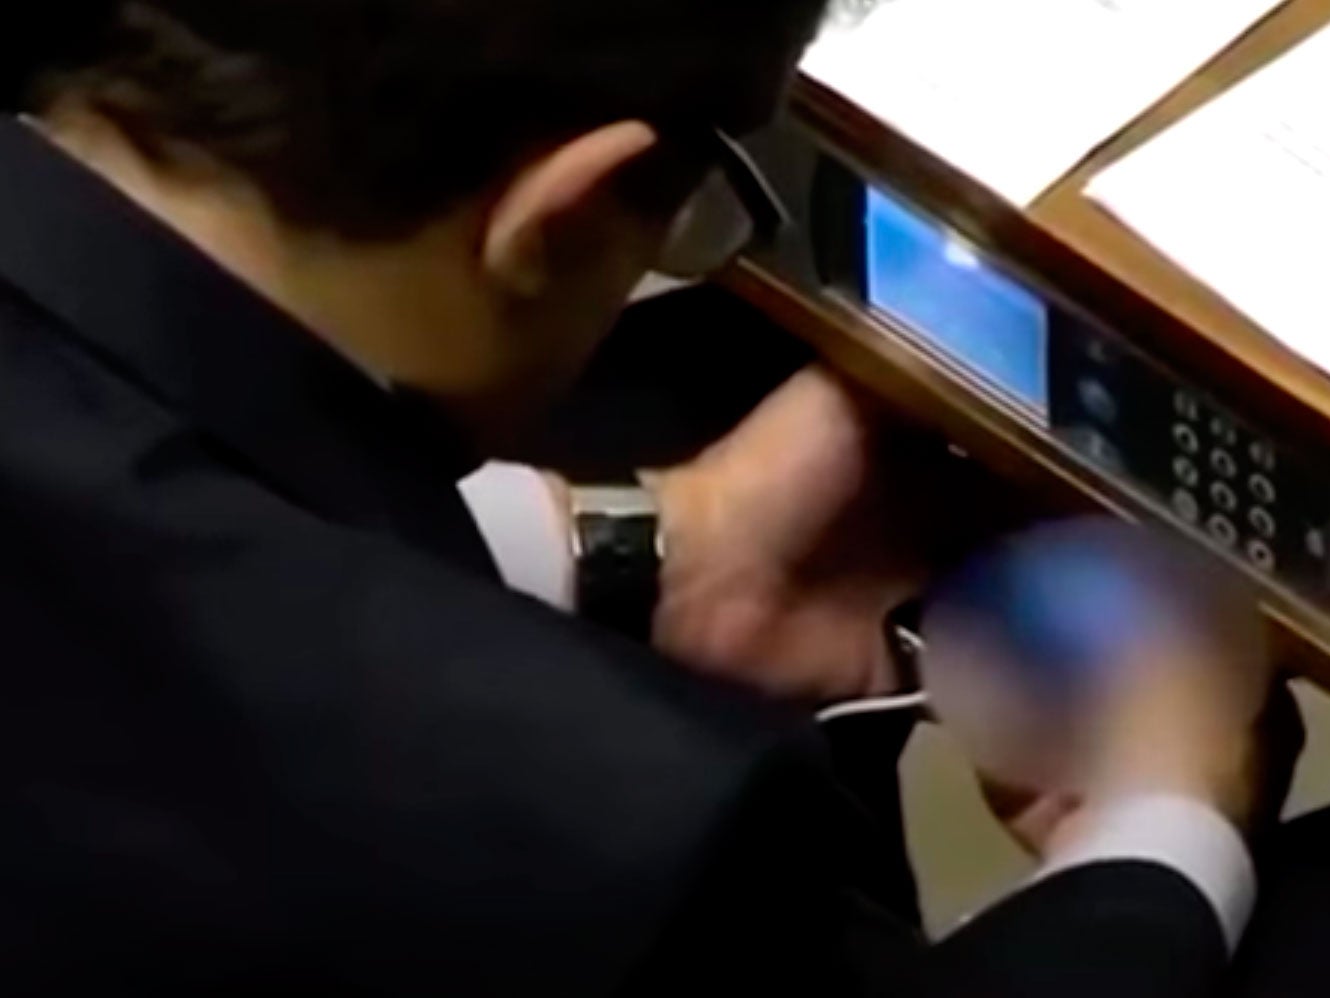 Joao Rodrigues was caught watching blue movies on his phone in parliament